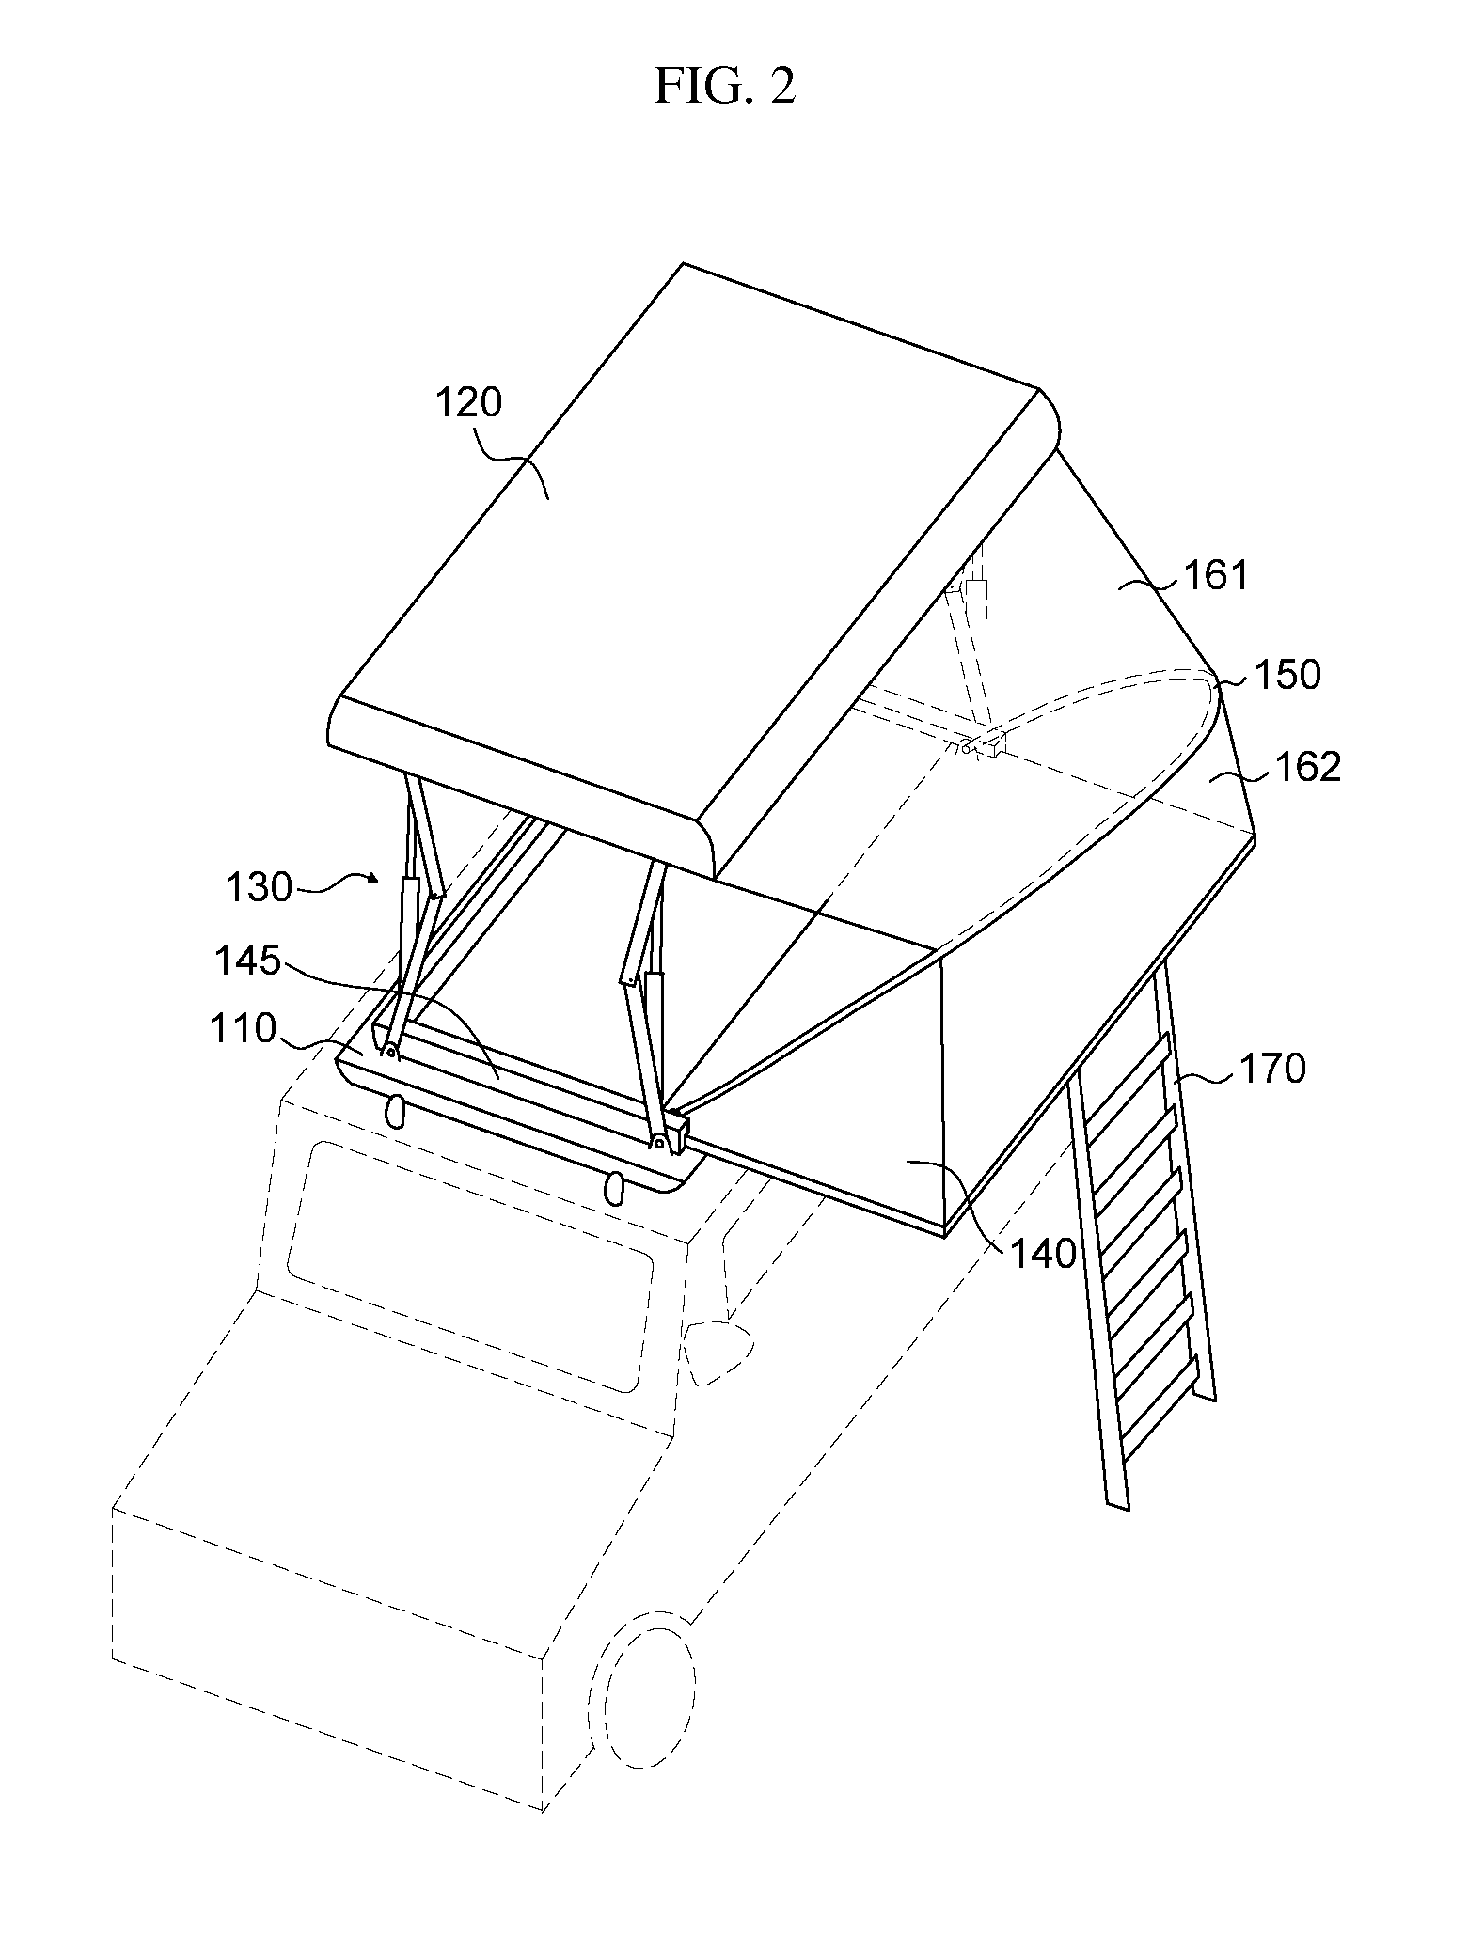 Expandable hard-shell tent mounted on a roof of vehicle